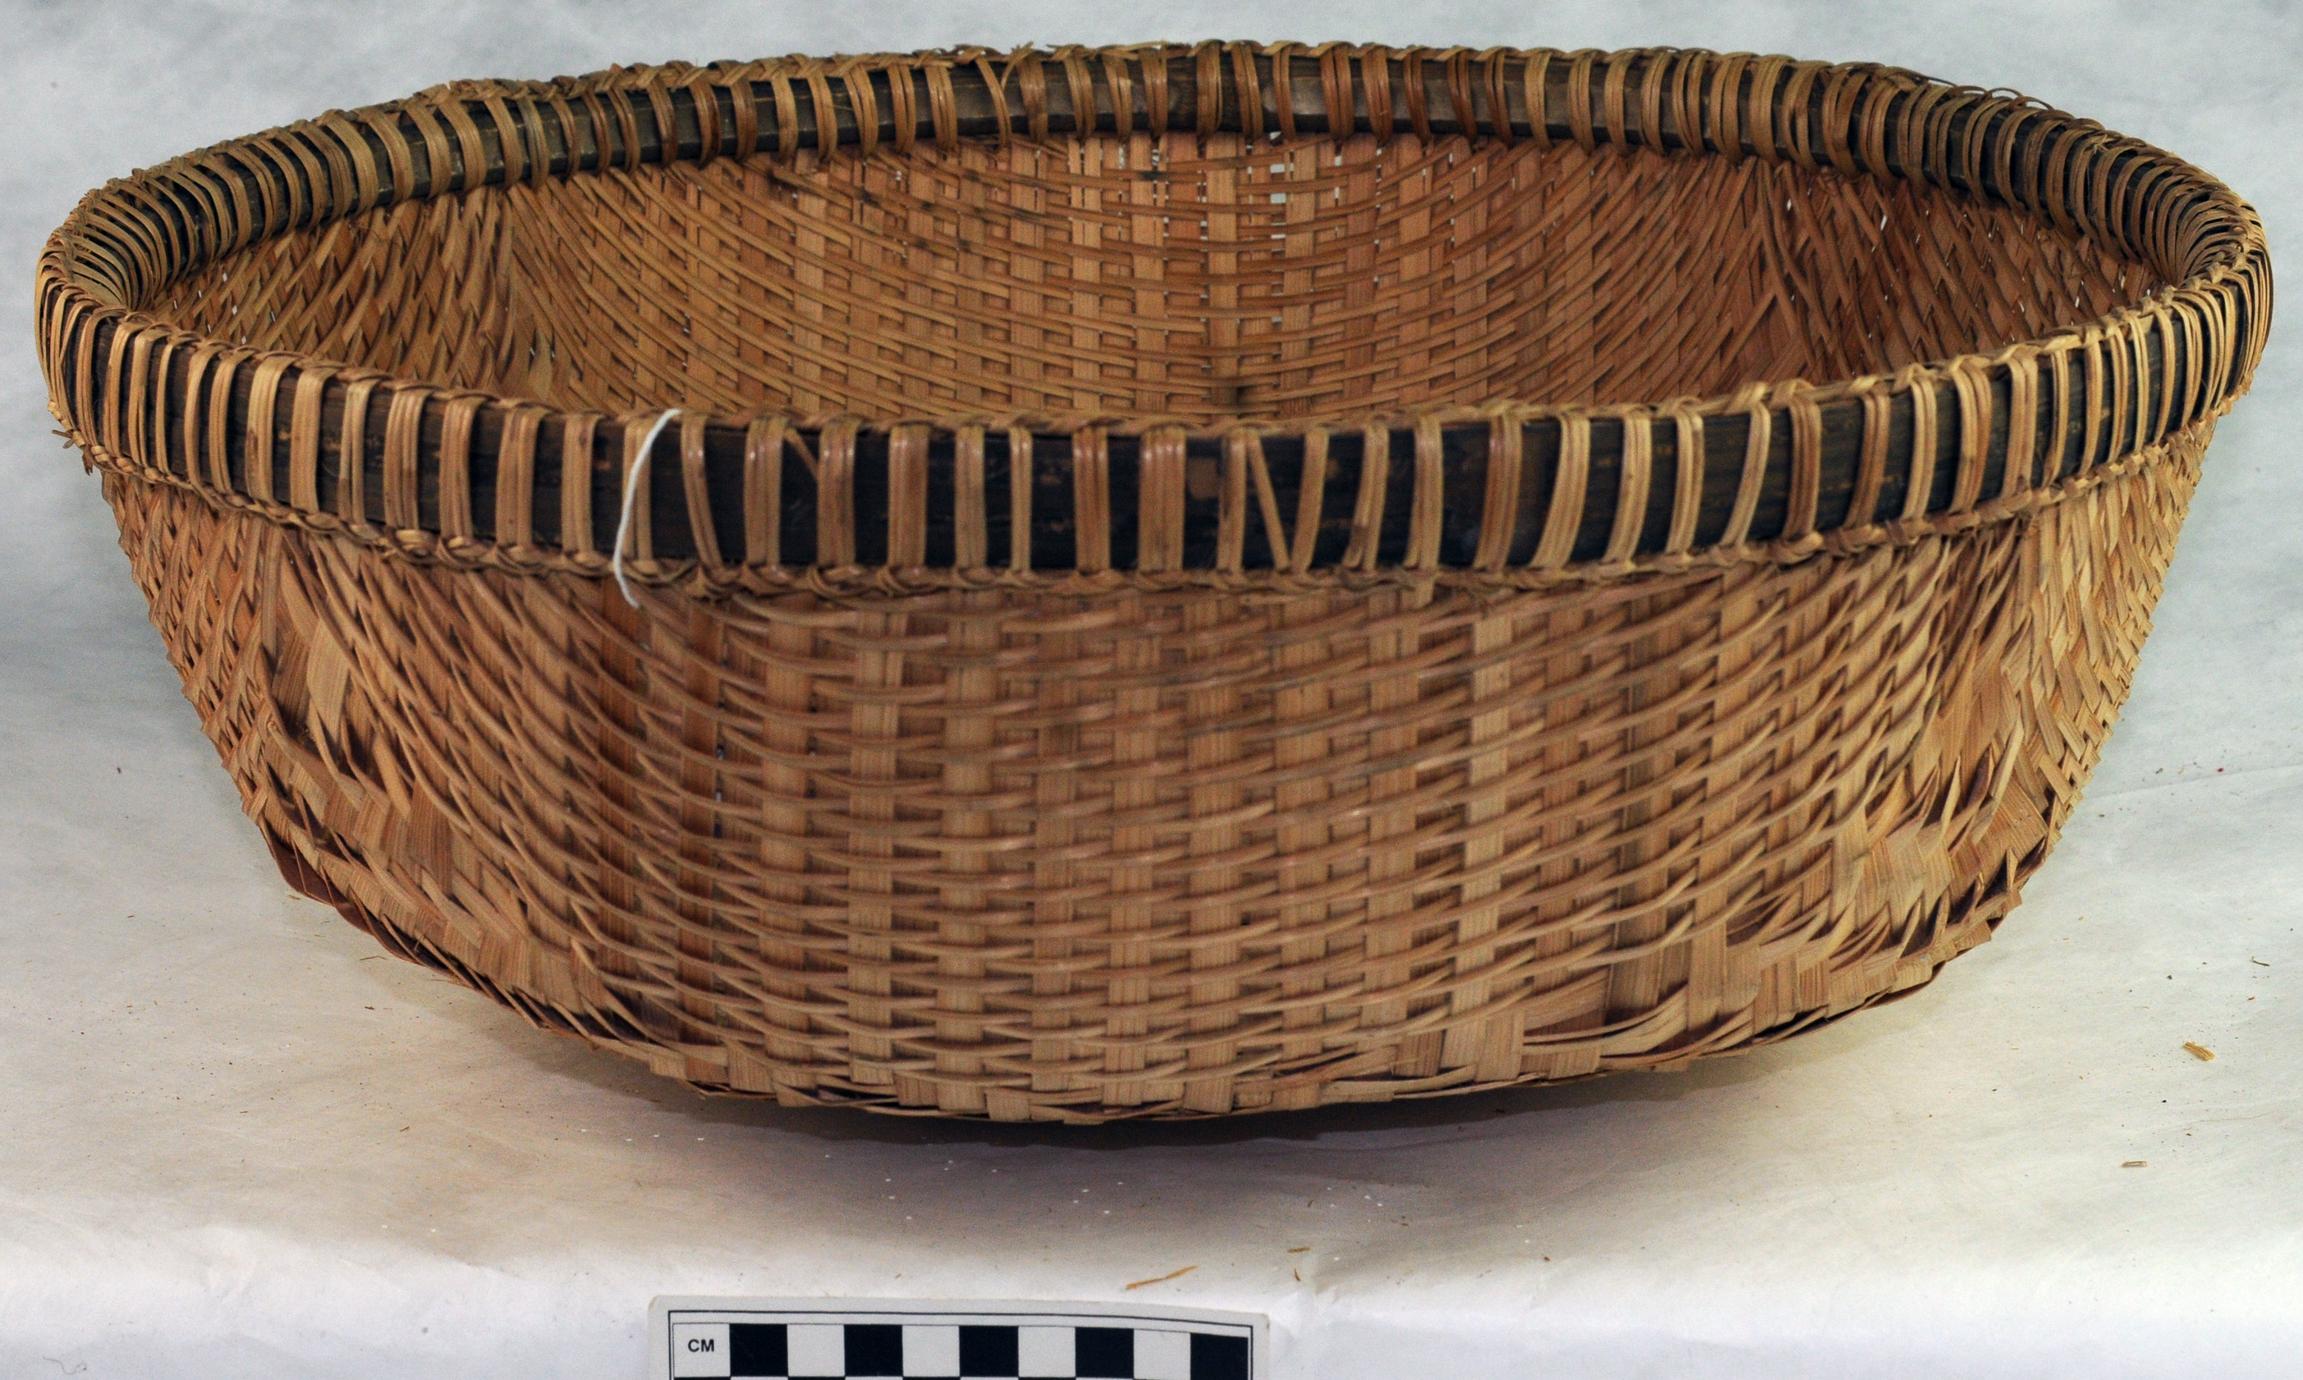 Baskets (1 of 4)